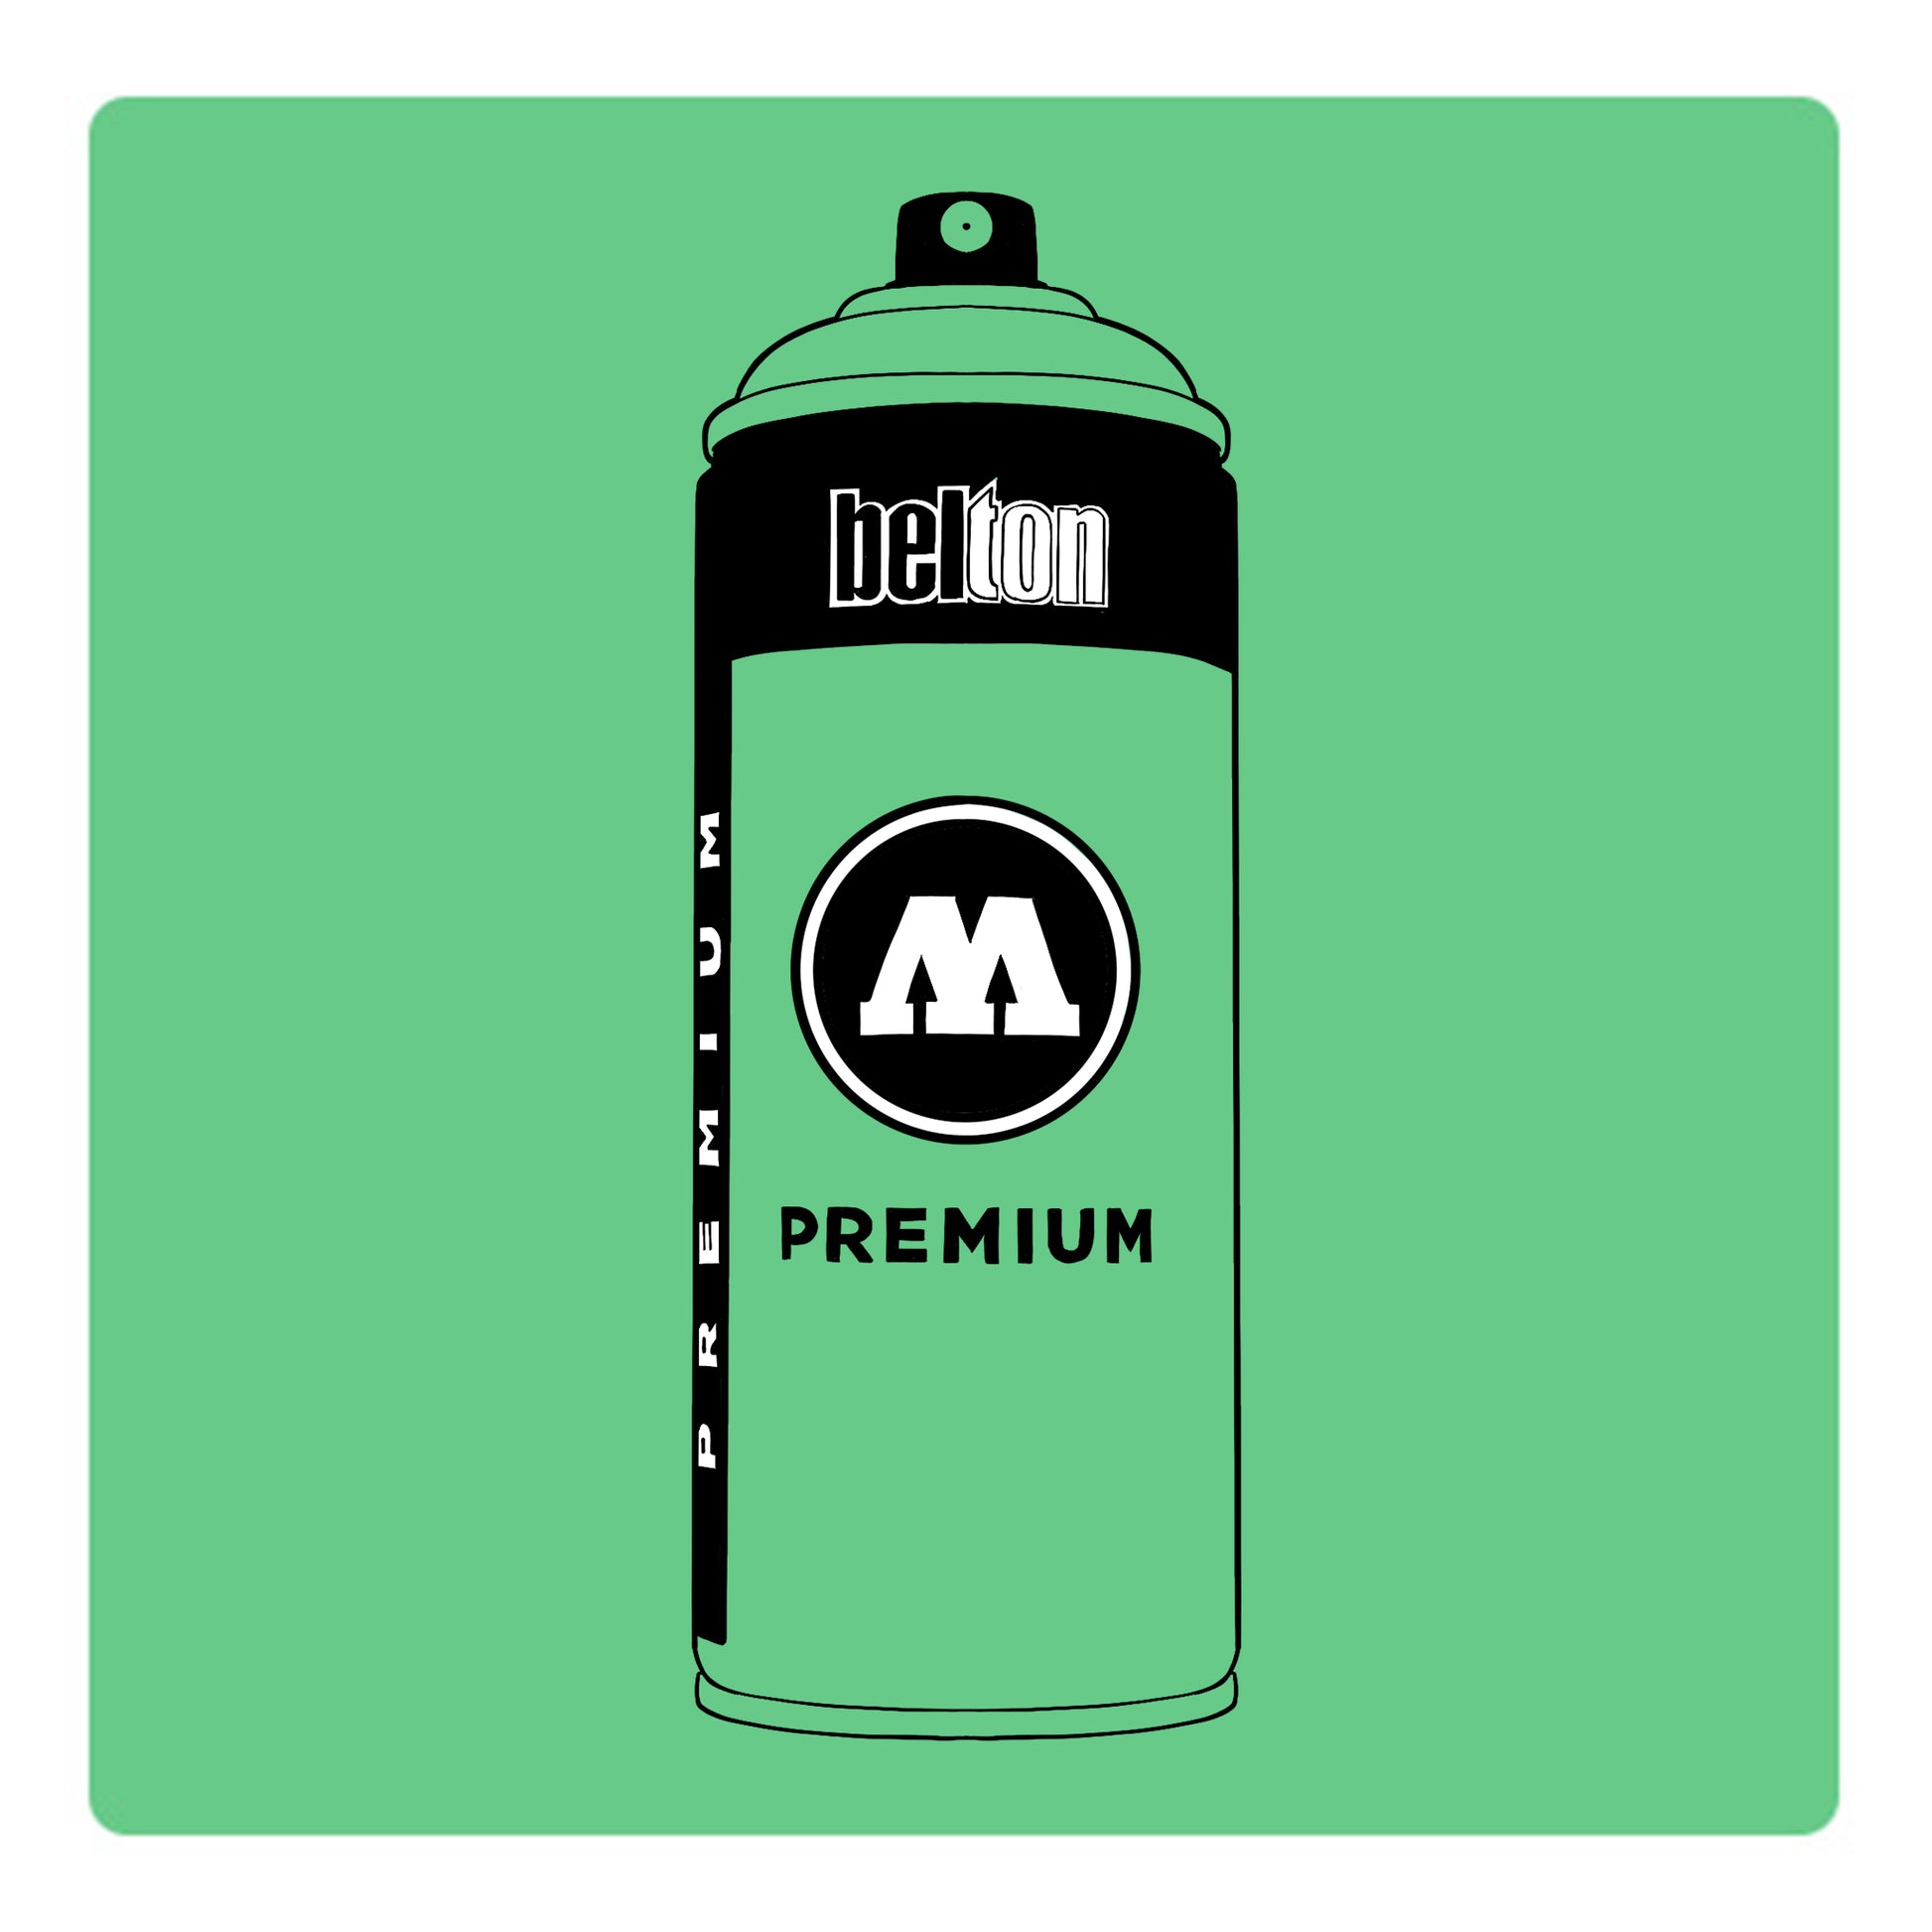 A black outline drawing of a emerald gren spray paint can with the words "belton","premium" and the letter"M" written on the face in black and white font. The background is a color swatch of the same emerald green with a white border